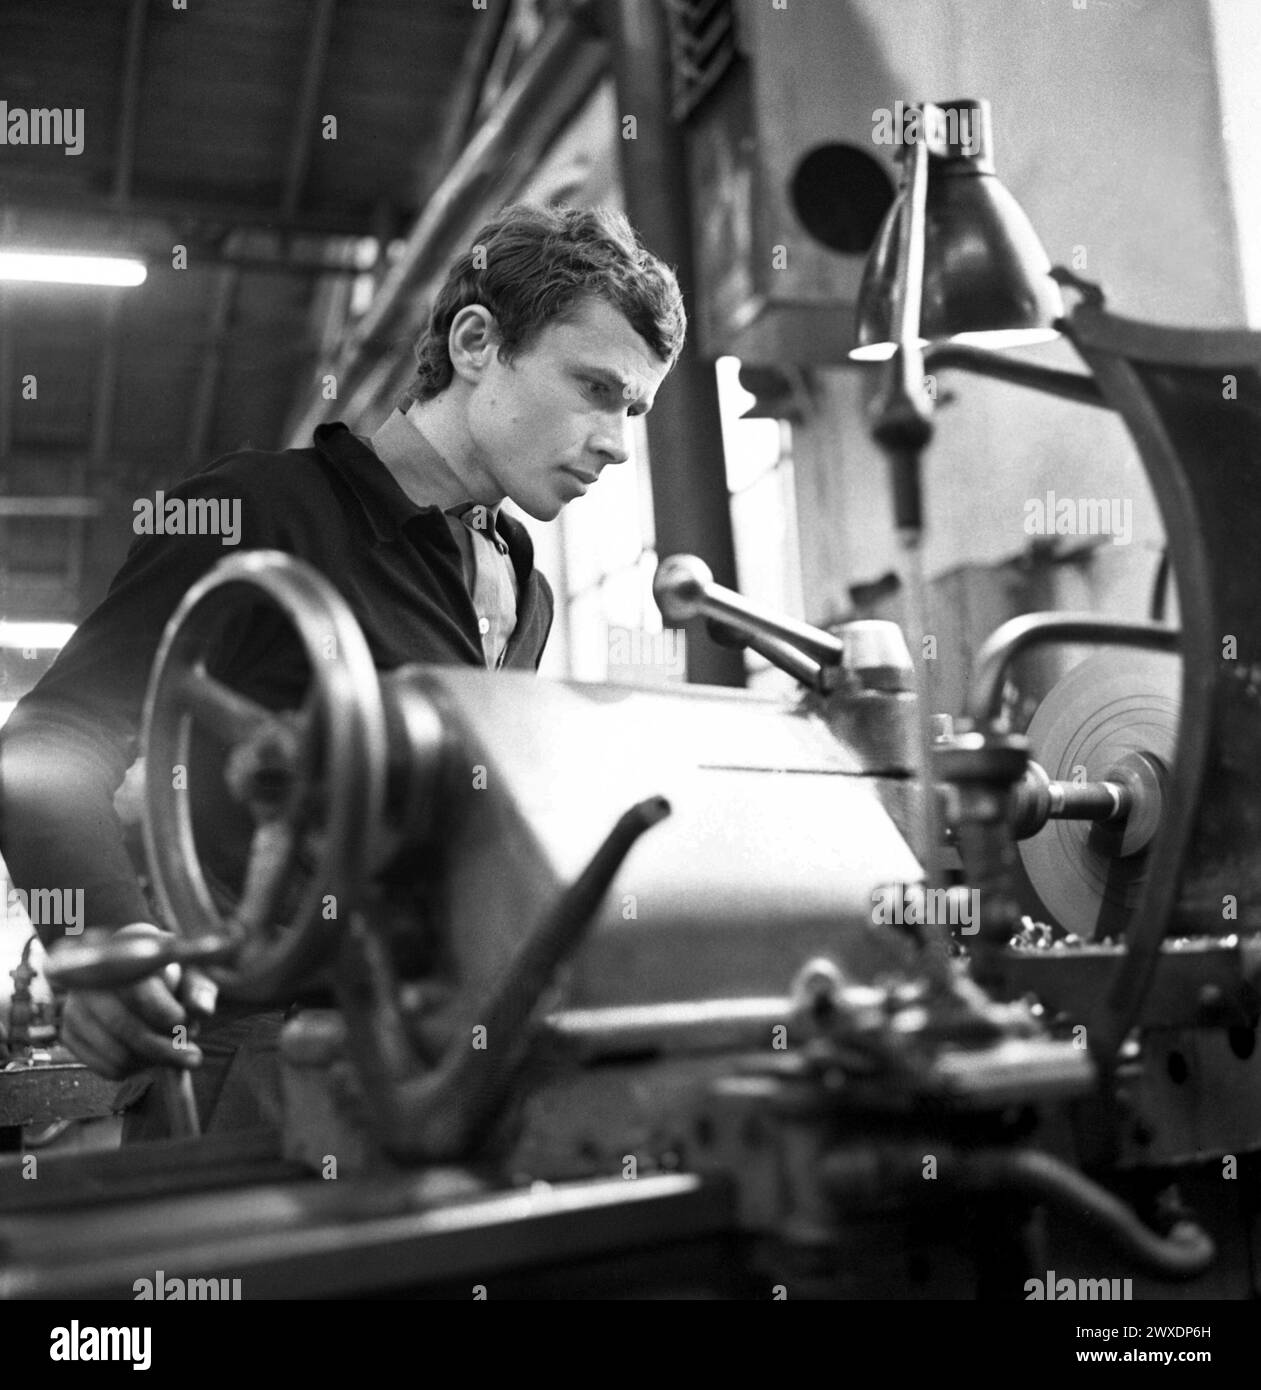 Socialist Republic of Romania in the 1970s. Portrait of a turner working in a state-owned factory. Stock Photo